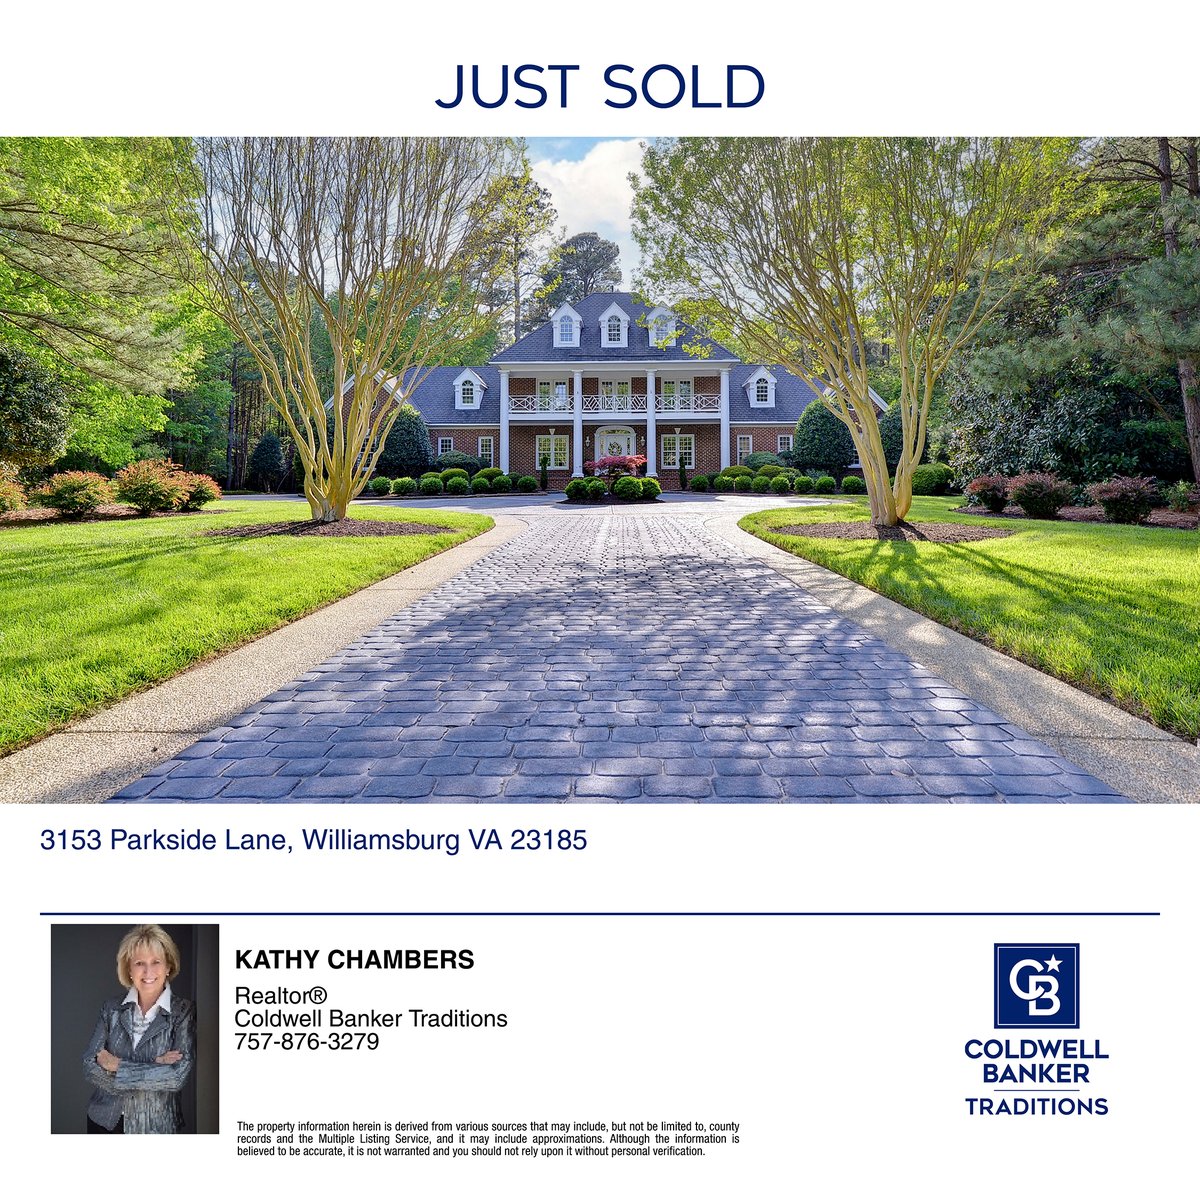 Kathy Chambers, Realtor with Coldwell Banker Traditions, JUST SOLD this extraordinary home in Williamsburg, Virginia. If you are looking to buy or sell a home, please call Kathy today!
#justsold #coldwellbanker.com